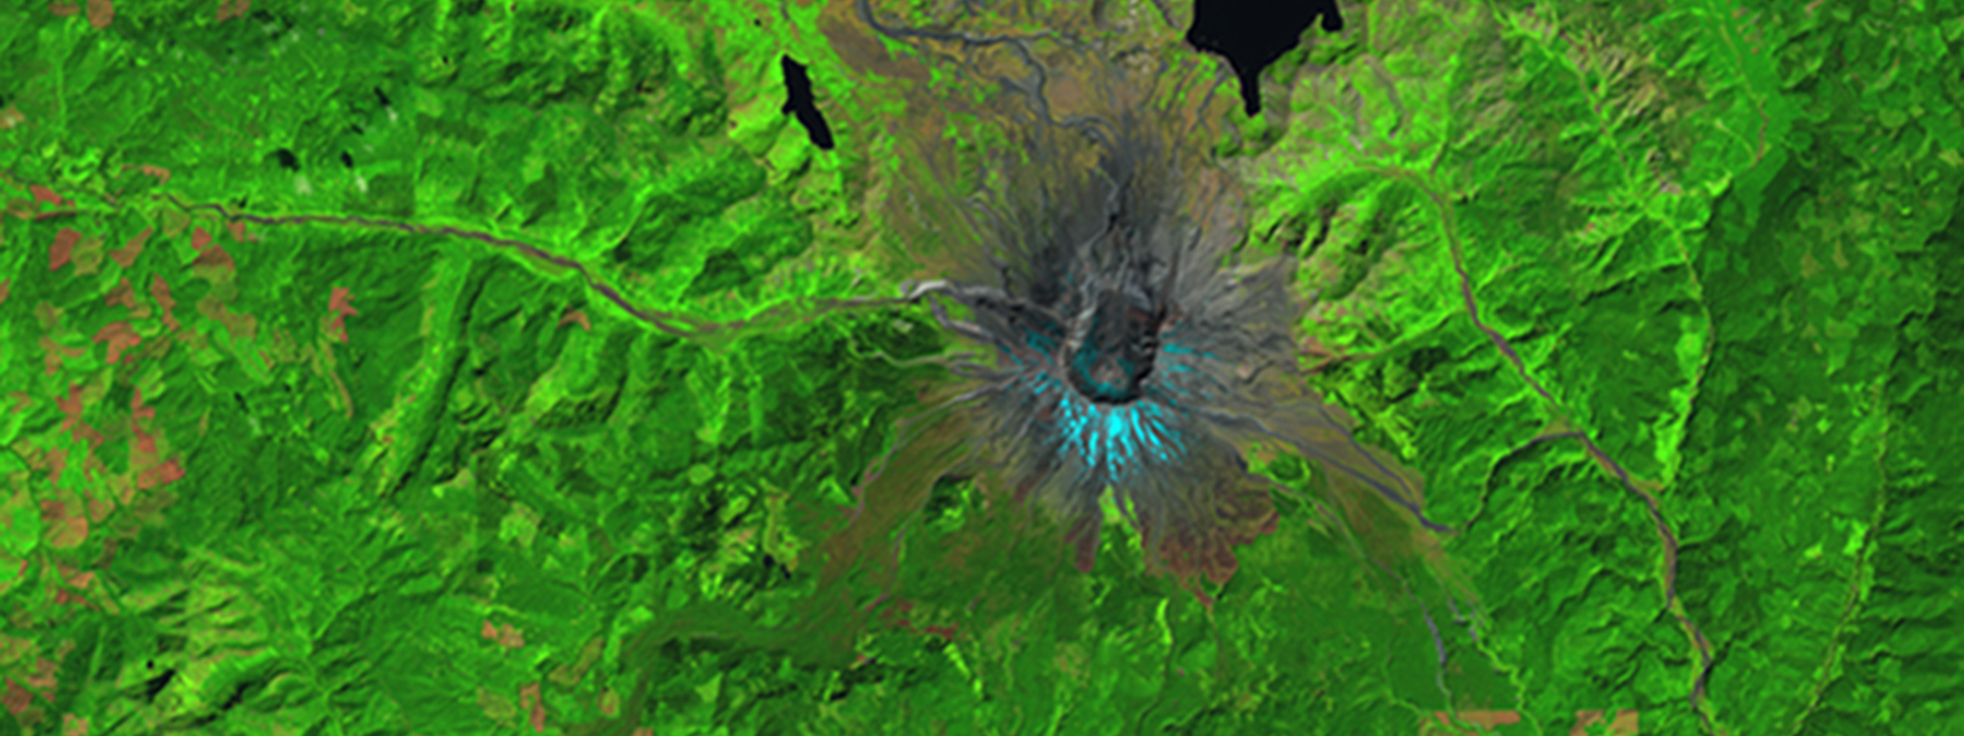 Mt. St. Helens regrowth image